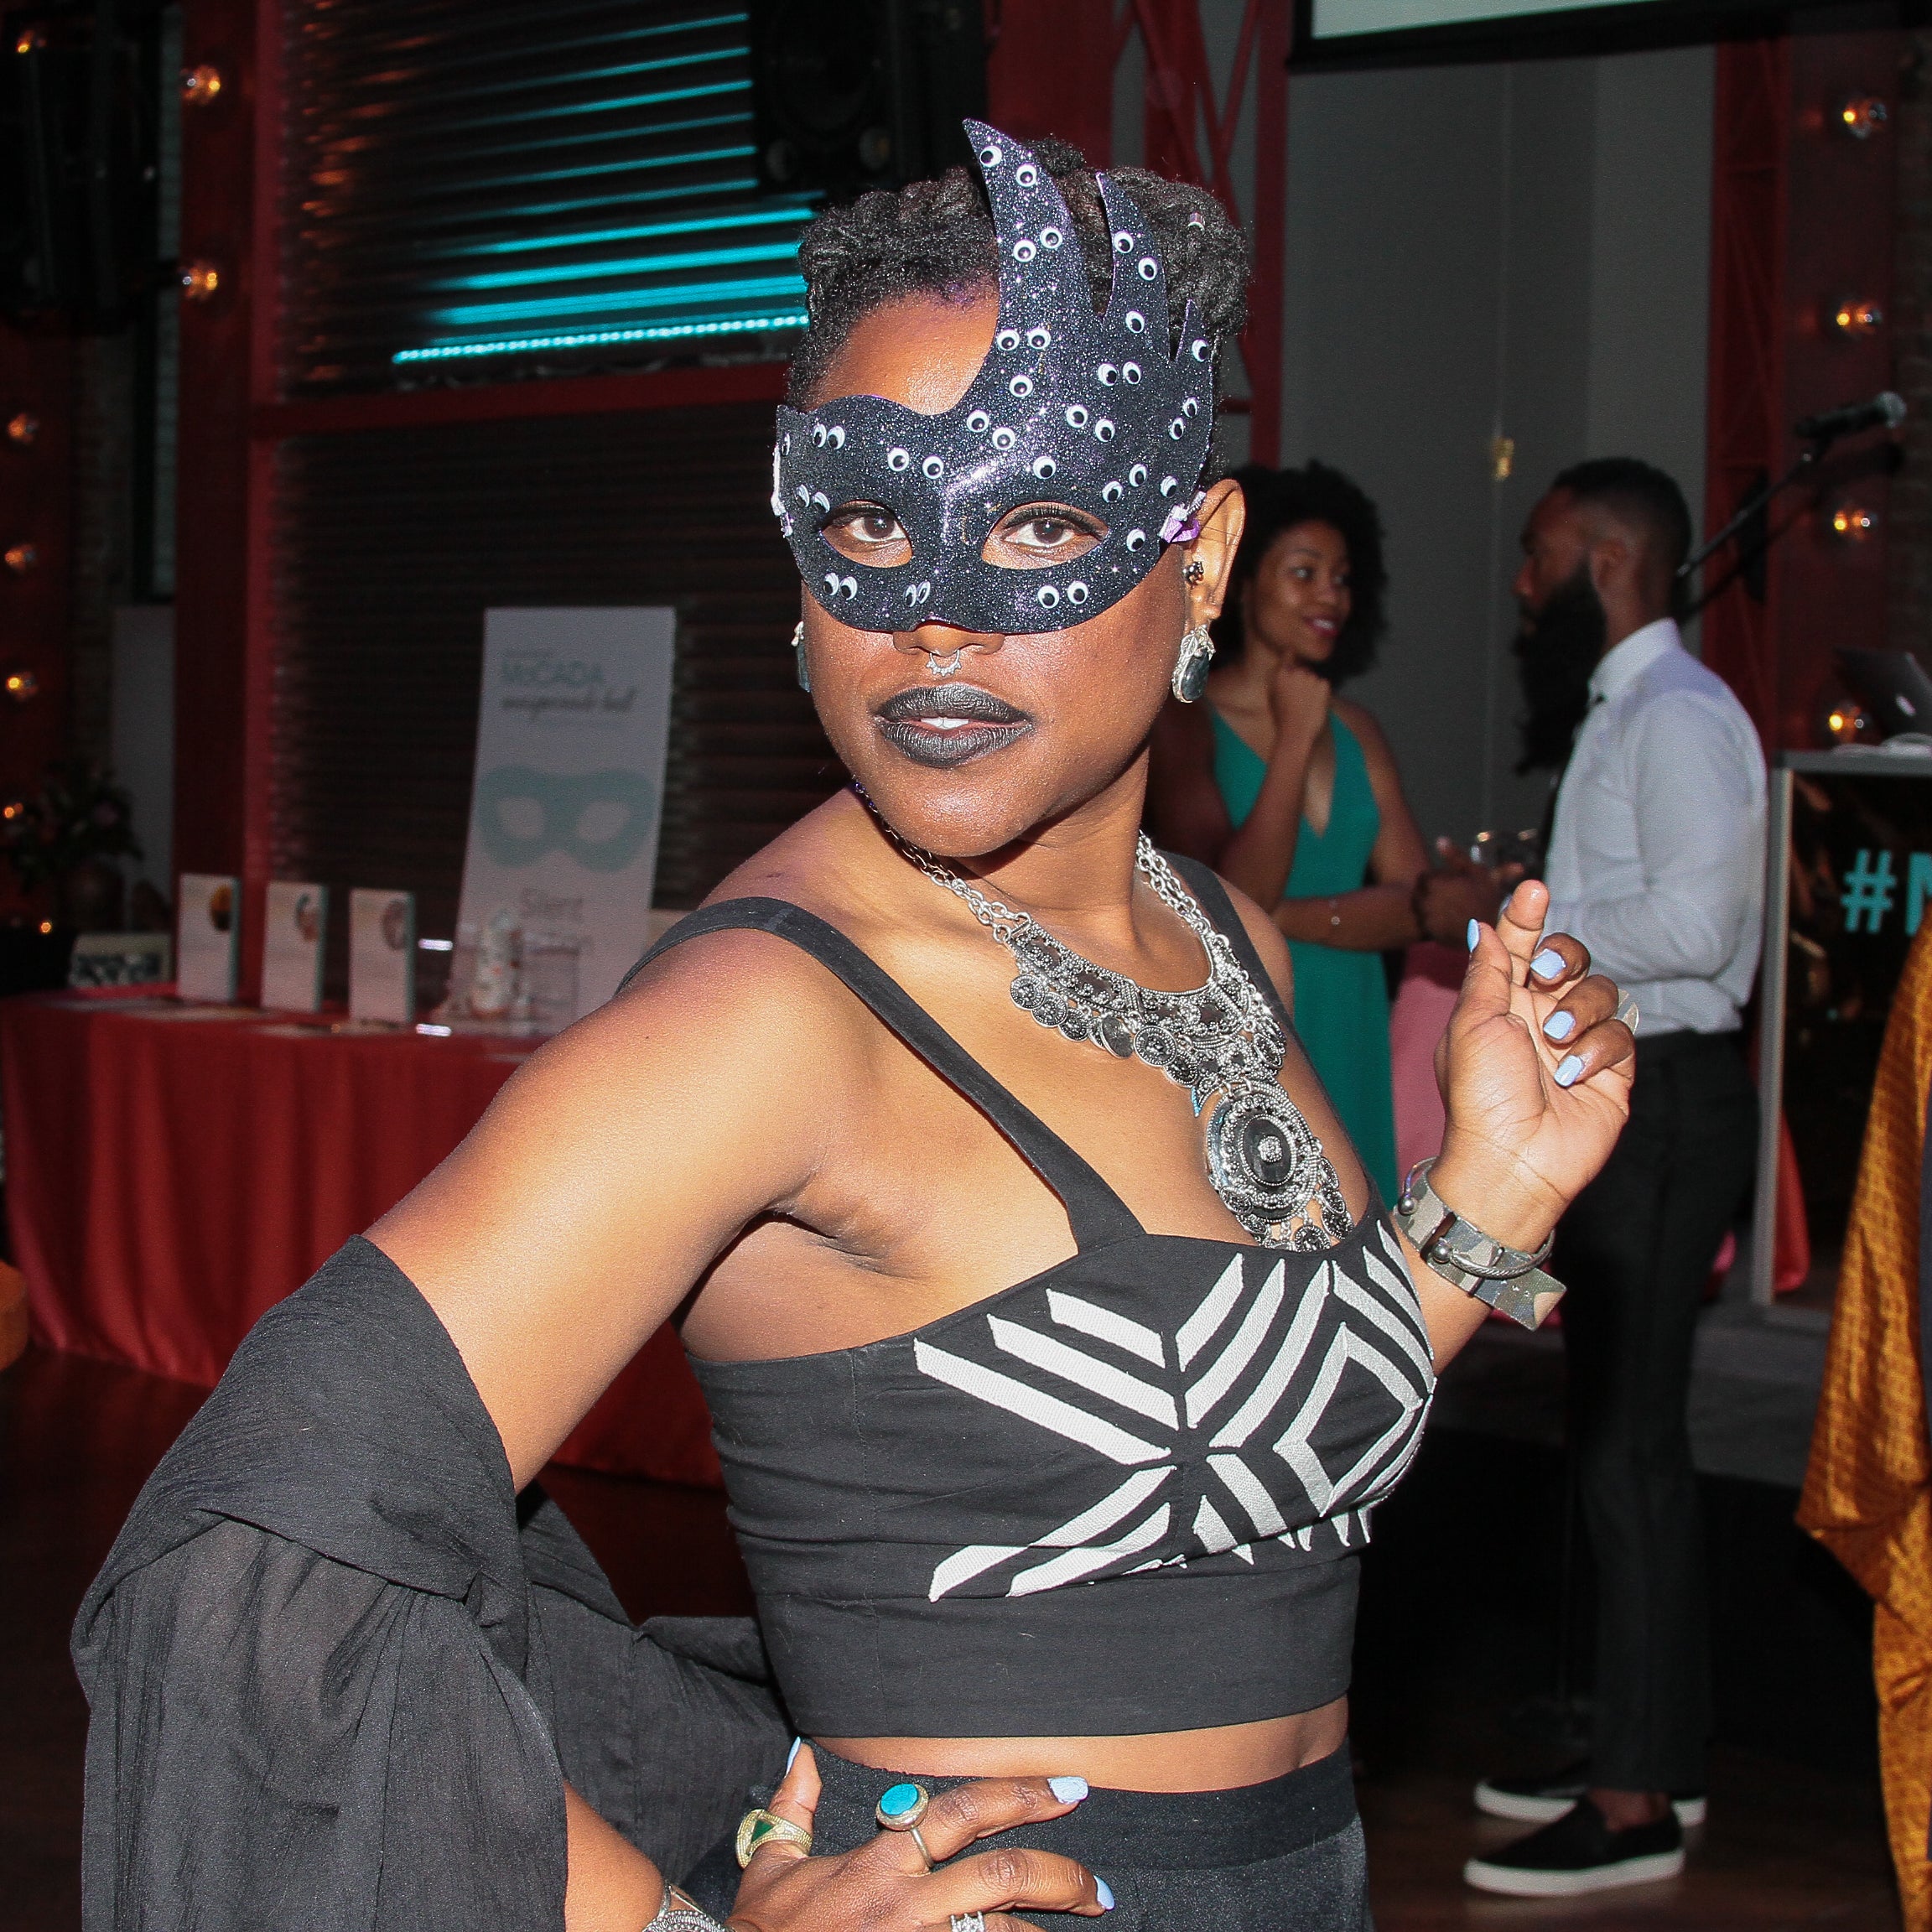 Stars Get Glam for The MoCADA 2nd ANNUAL Masquerade Ball
